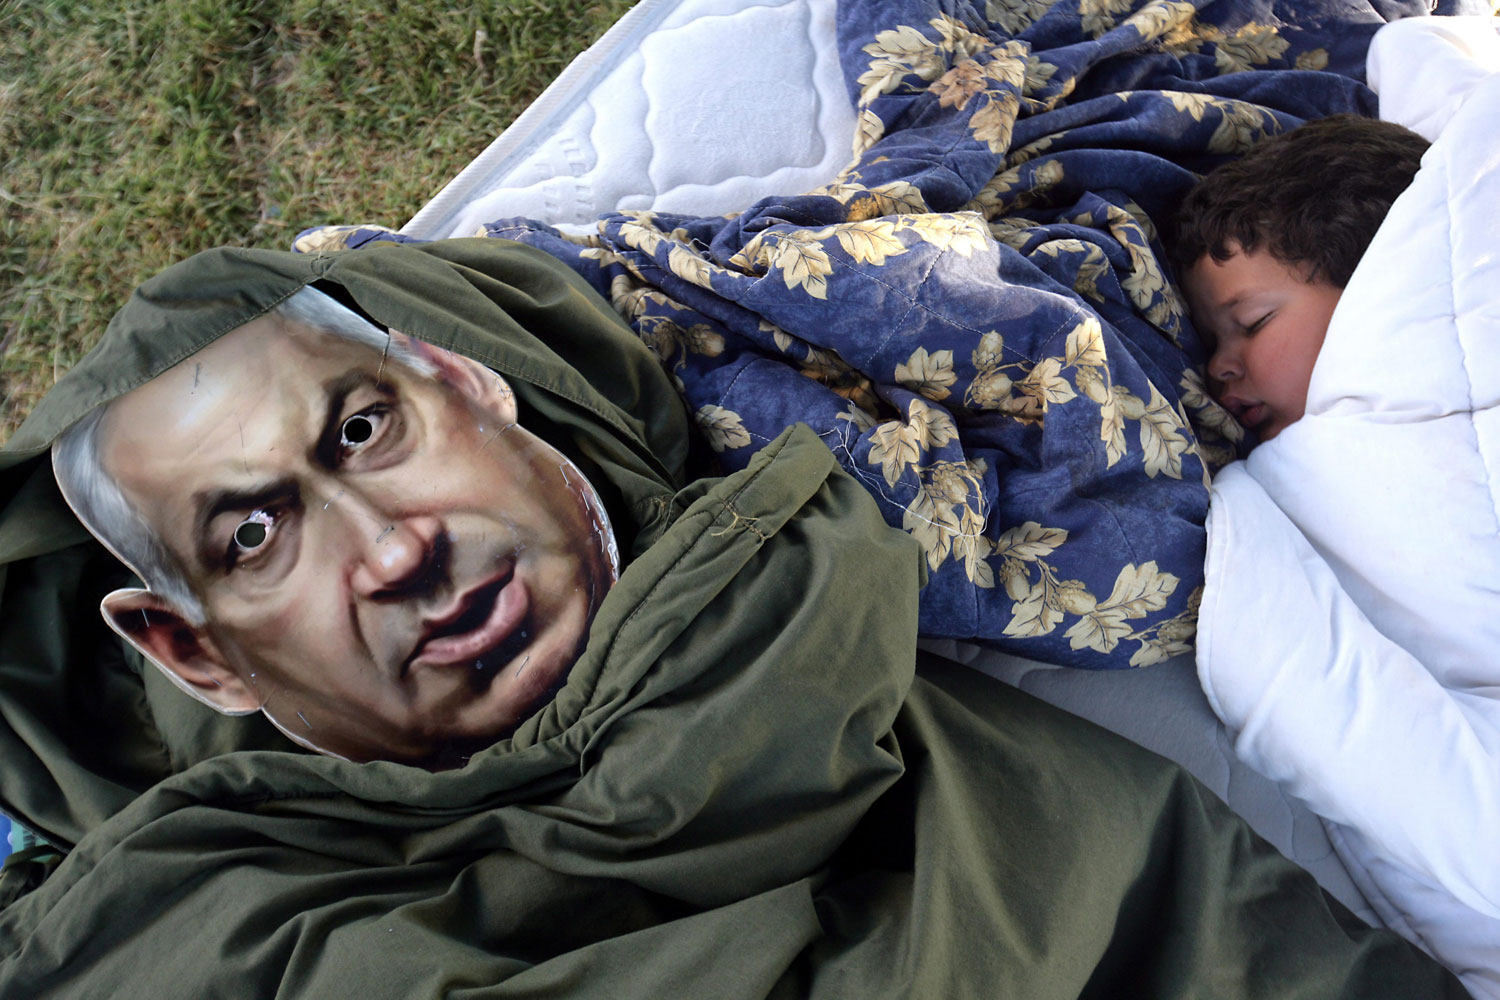 August 8, 2011. An Israeli child sleeps next to a picture of Israel Prime Minister Benjamin Netanyahu in a sleeping bag in a 'tent city' set up in a small central Jerusalem park, Israel. Israel's parliament passed a housing bill  aimed at alleviating the country's shortage of homes by cutting red tape to speed up the approval of building projects. But critics vowed to step up their protests after accusing the bill of failing to promote affordable housing. Leaders of the protest movement have also called for another mass rally to take place in Tel Aviv this weekend. Some 300,000 people demonstrated in major Israeli cities over the weekend, protesting the country's high cost of living.